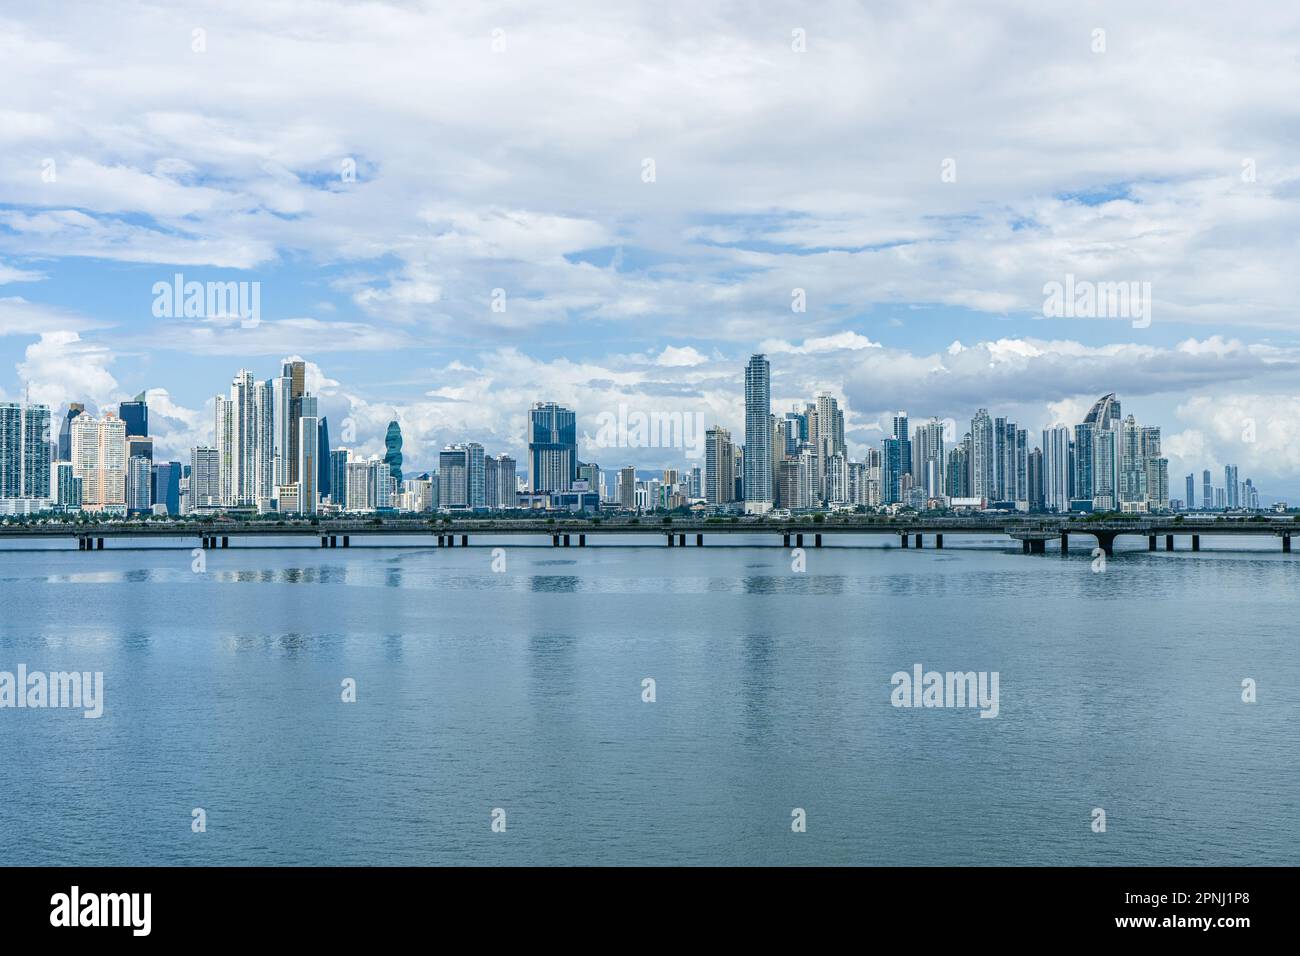 Panama City causeway and Skyline Panama with blue cloudy sky and an oceanfront view Stock Photo